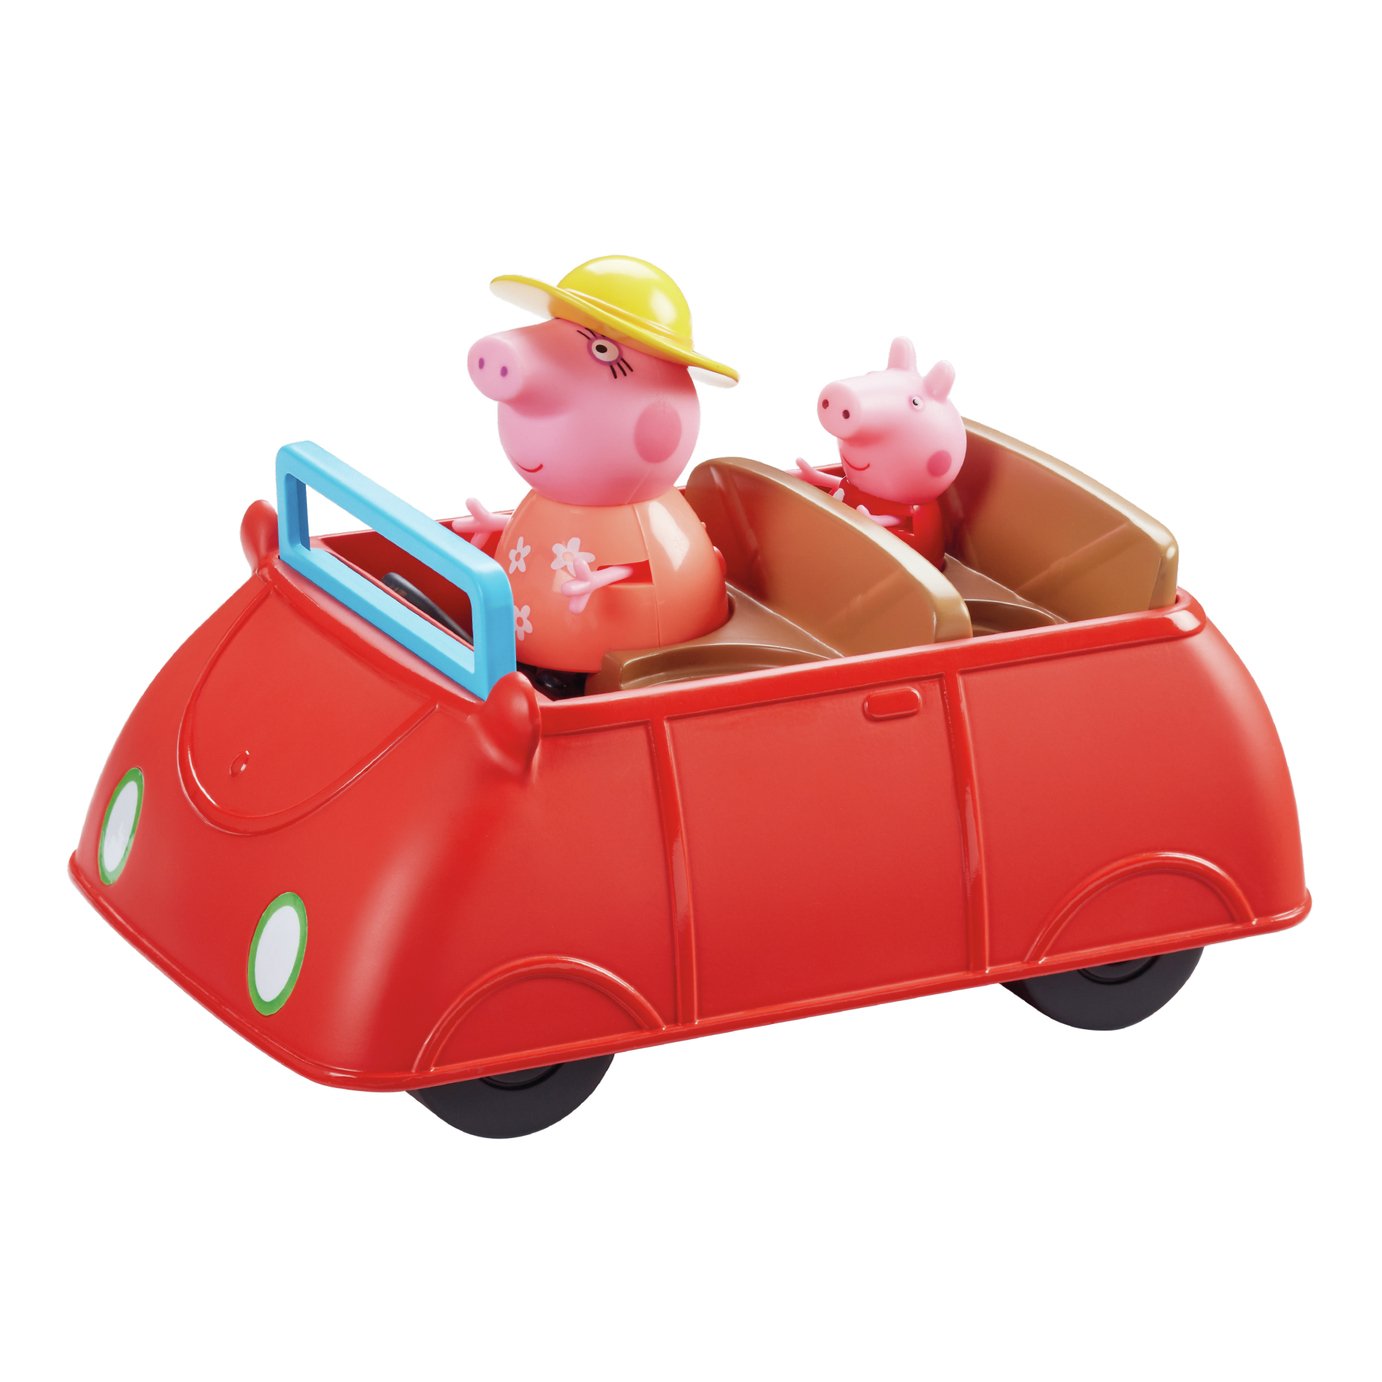 Peppa Pig Deluxe Car Review